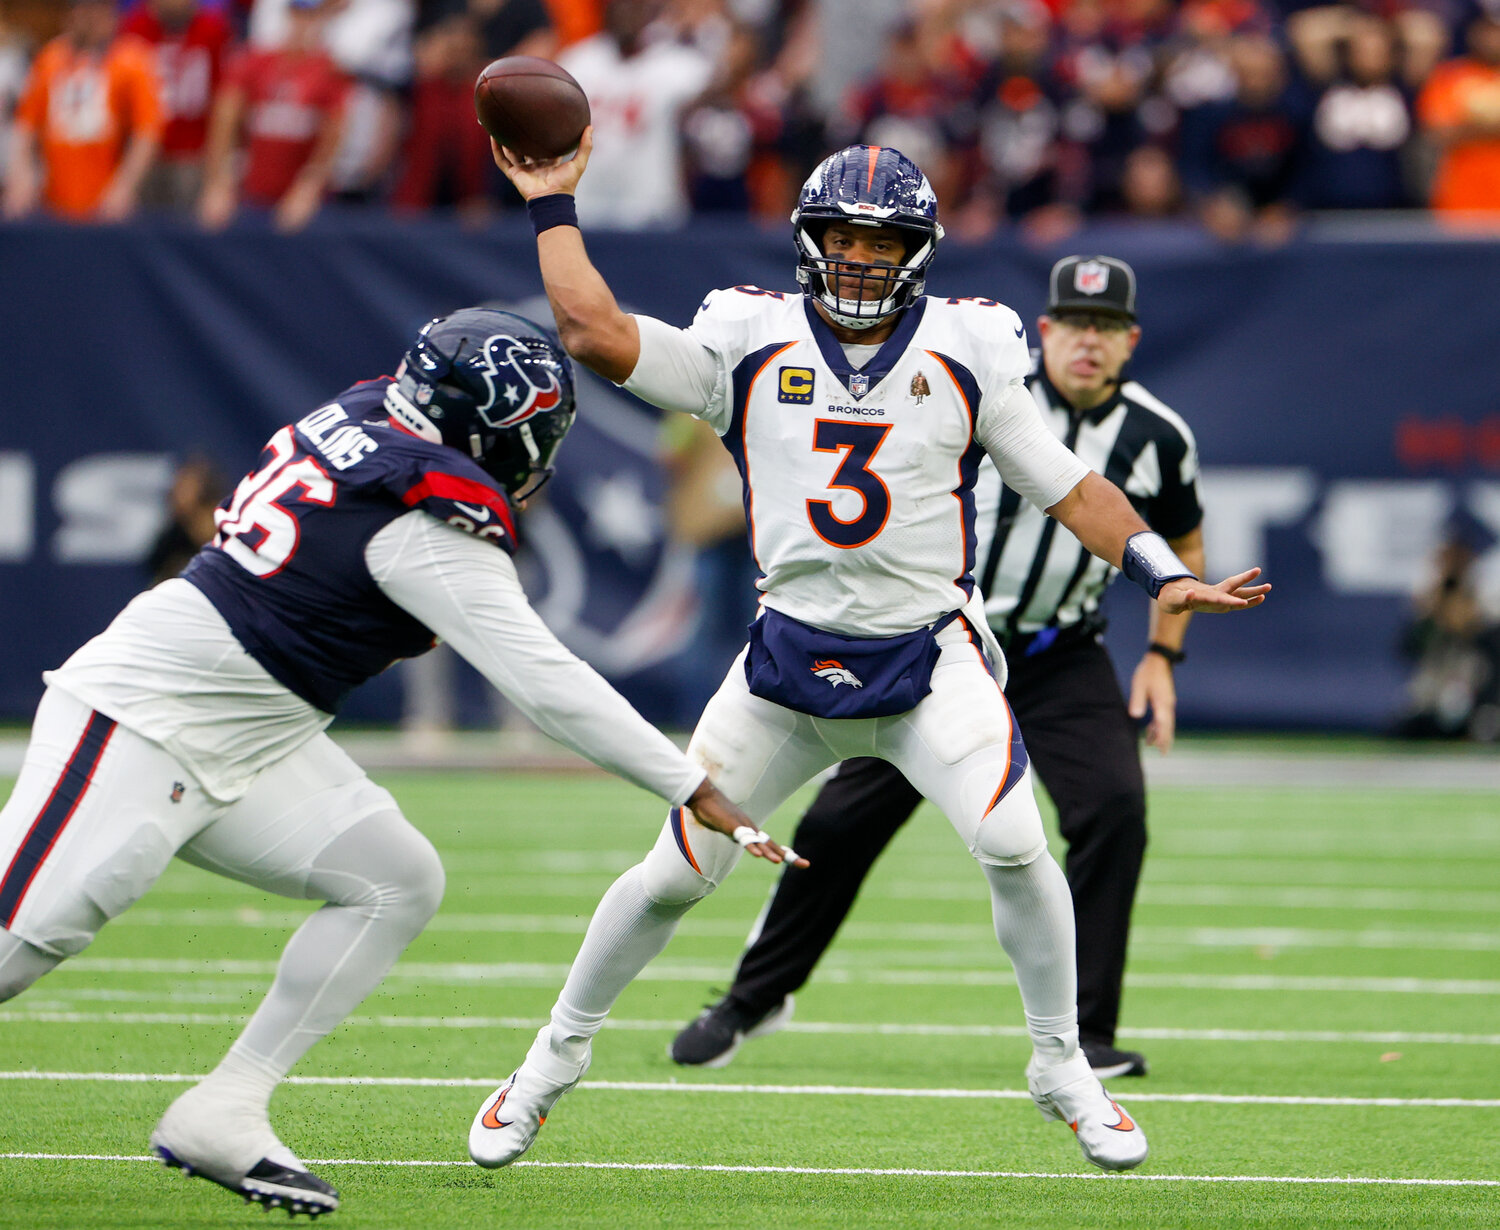 Broncos quarterback Russell Wilson (3) passes the ball during an NFL game between the Texans and the Broncos on December 3, 2023 in Houston. The Texans won, 22-17.